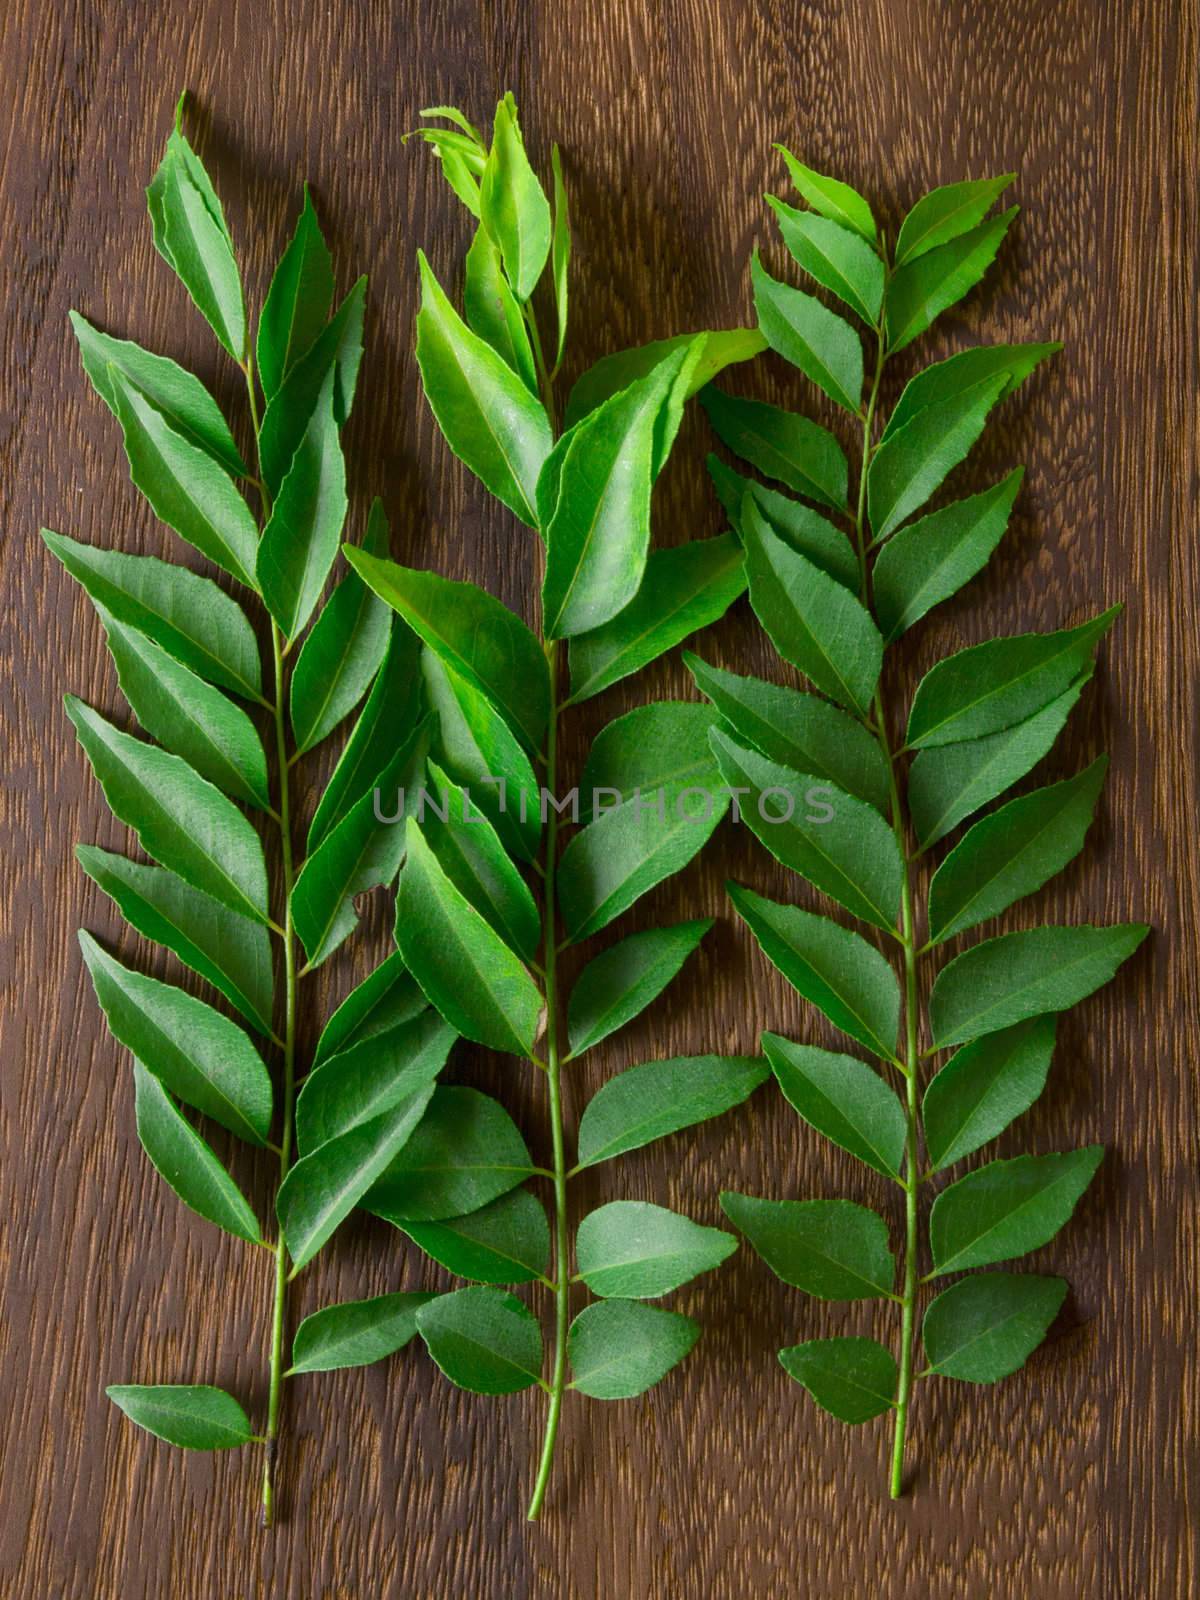 curry leaves by zkruger